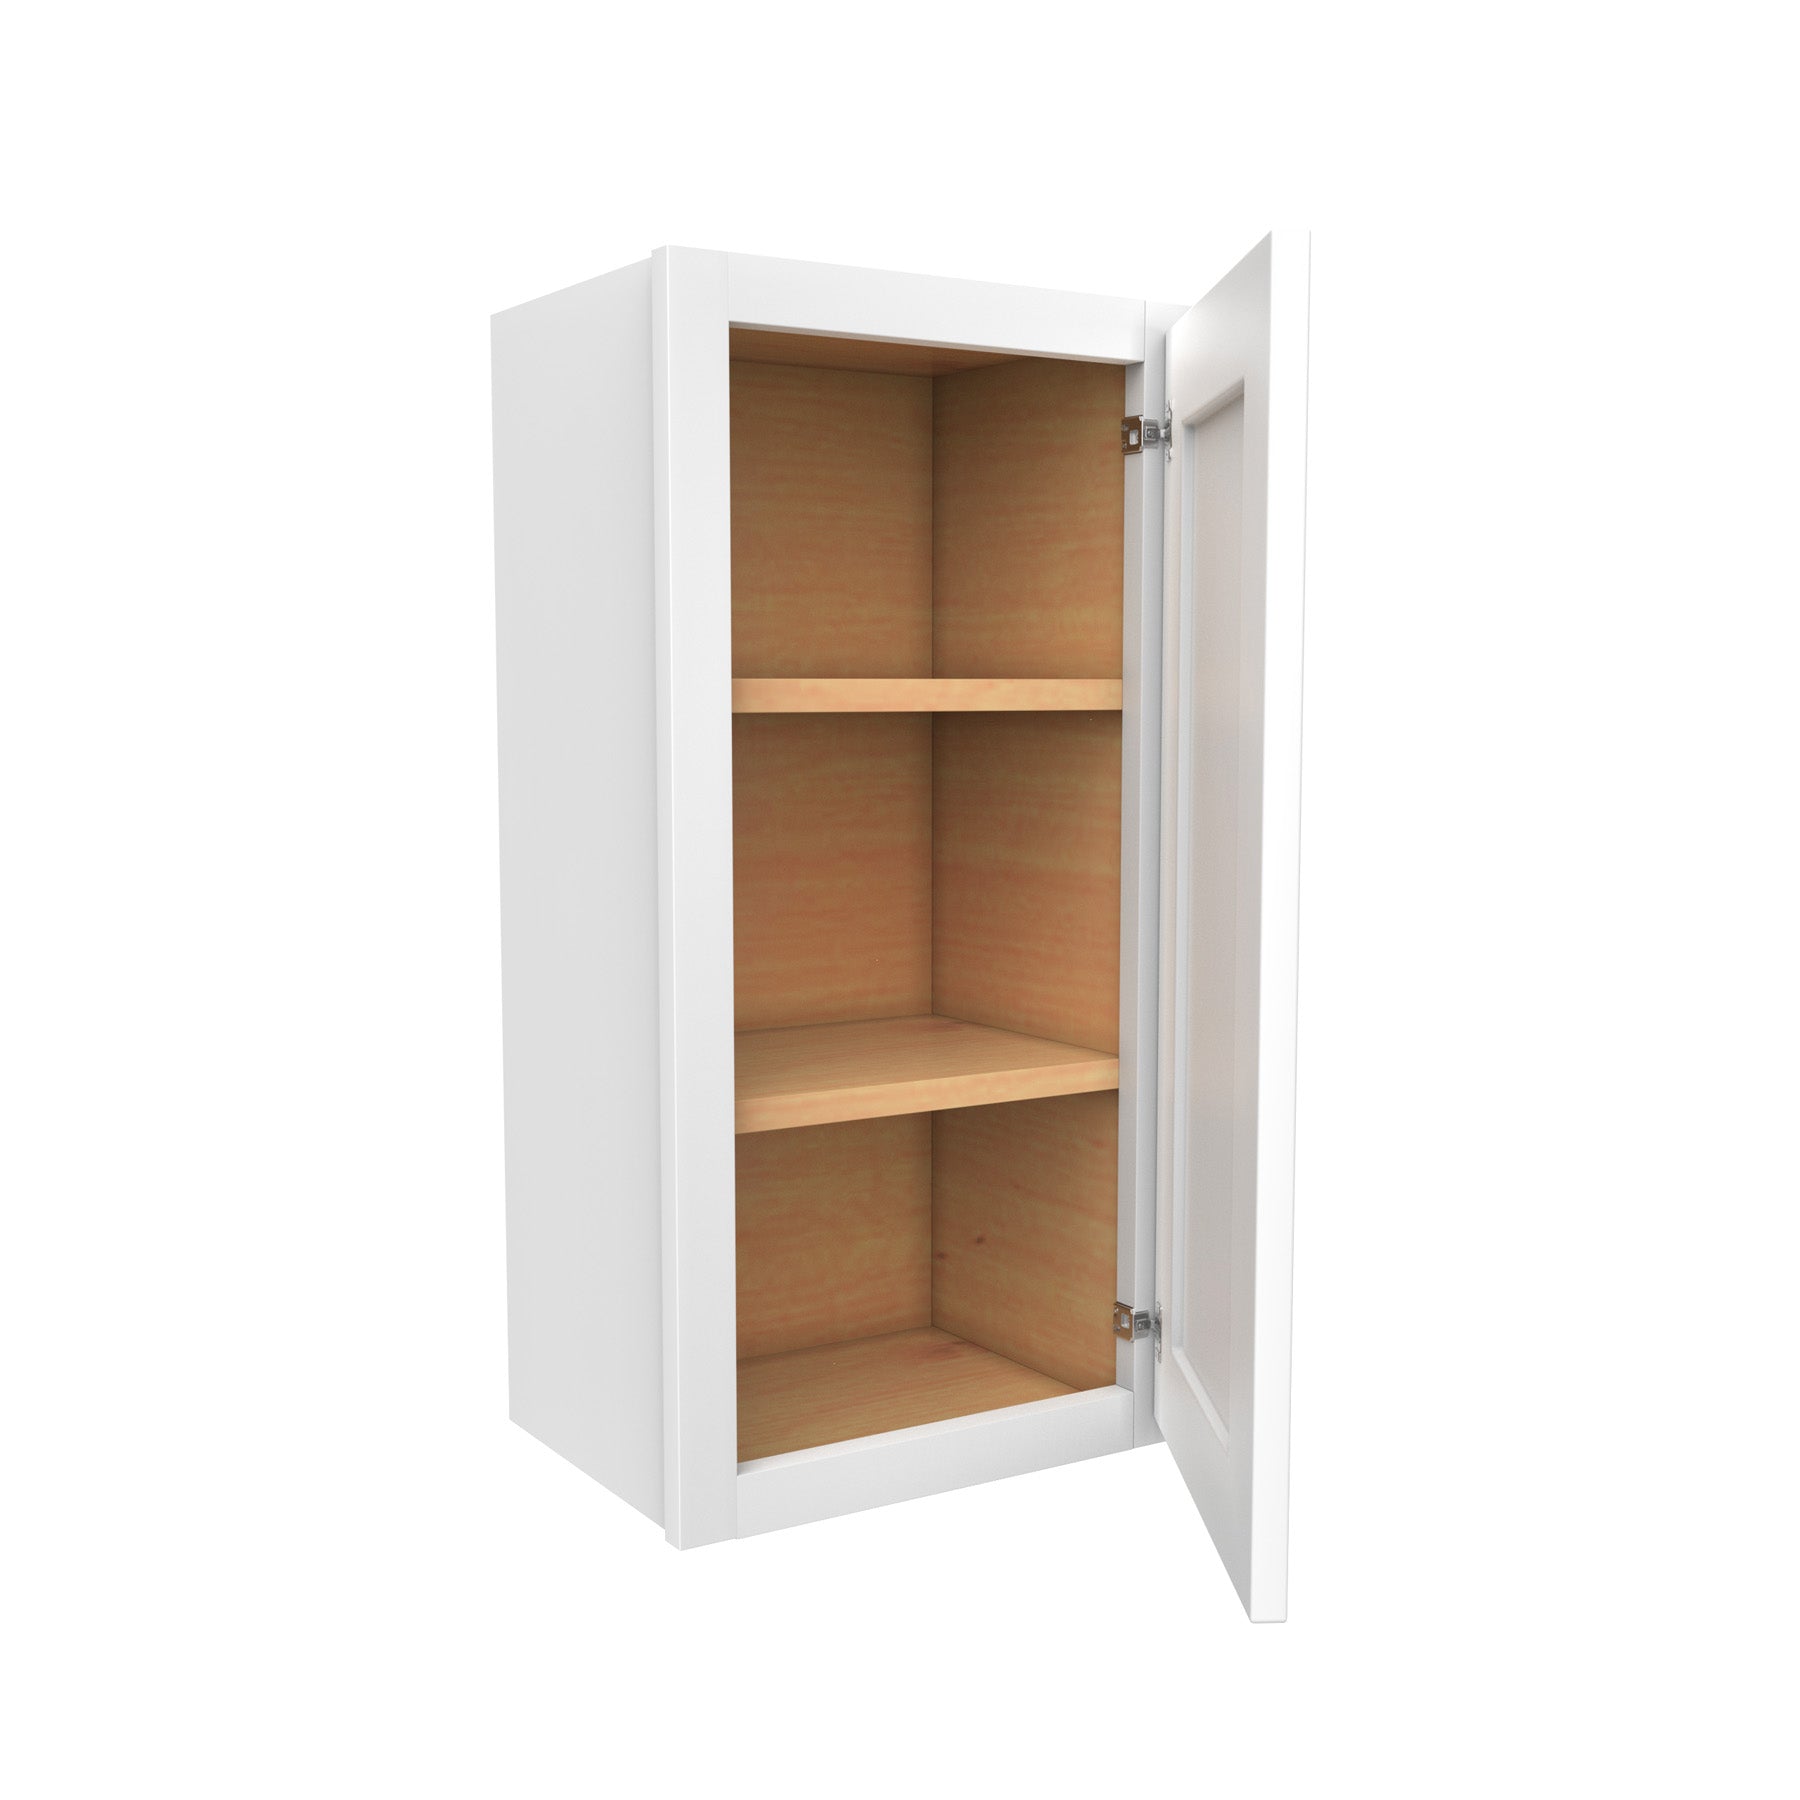 30 Inch High Single Door Wall Cabinet - Luxor White Shaker - Ready To Assemble, 15"W x 30"H x 12"D